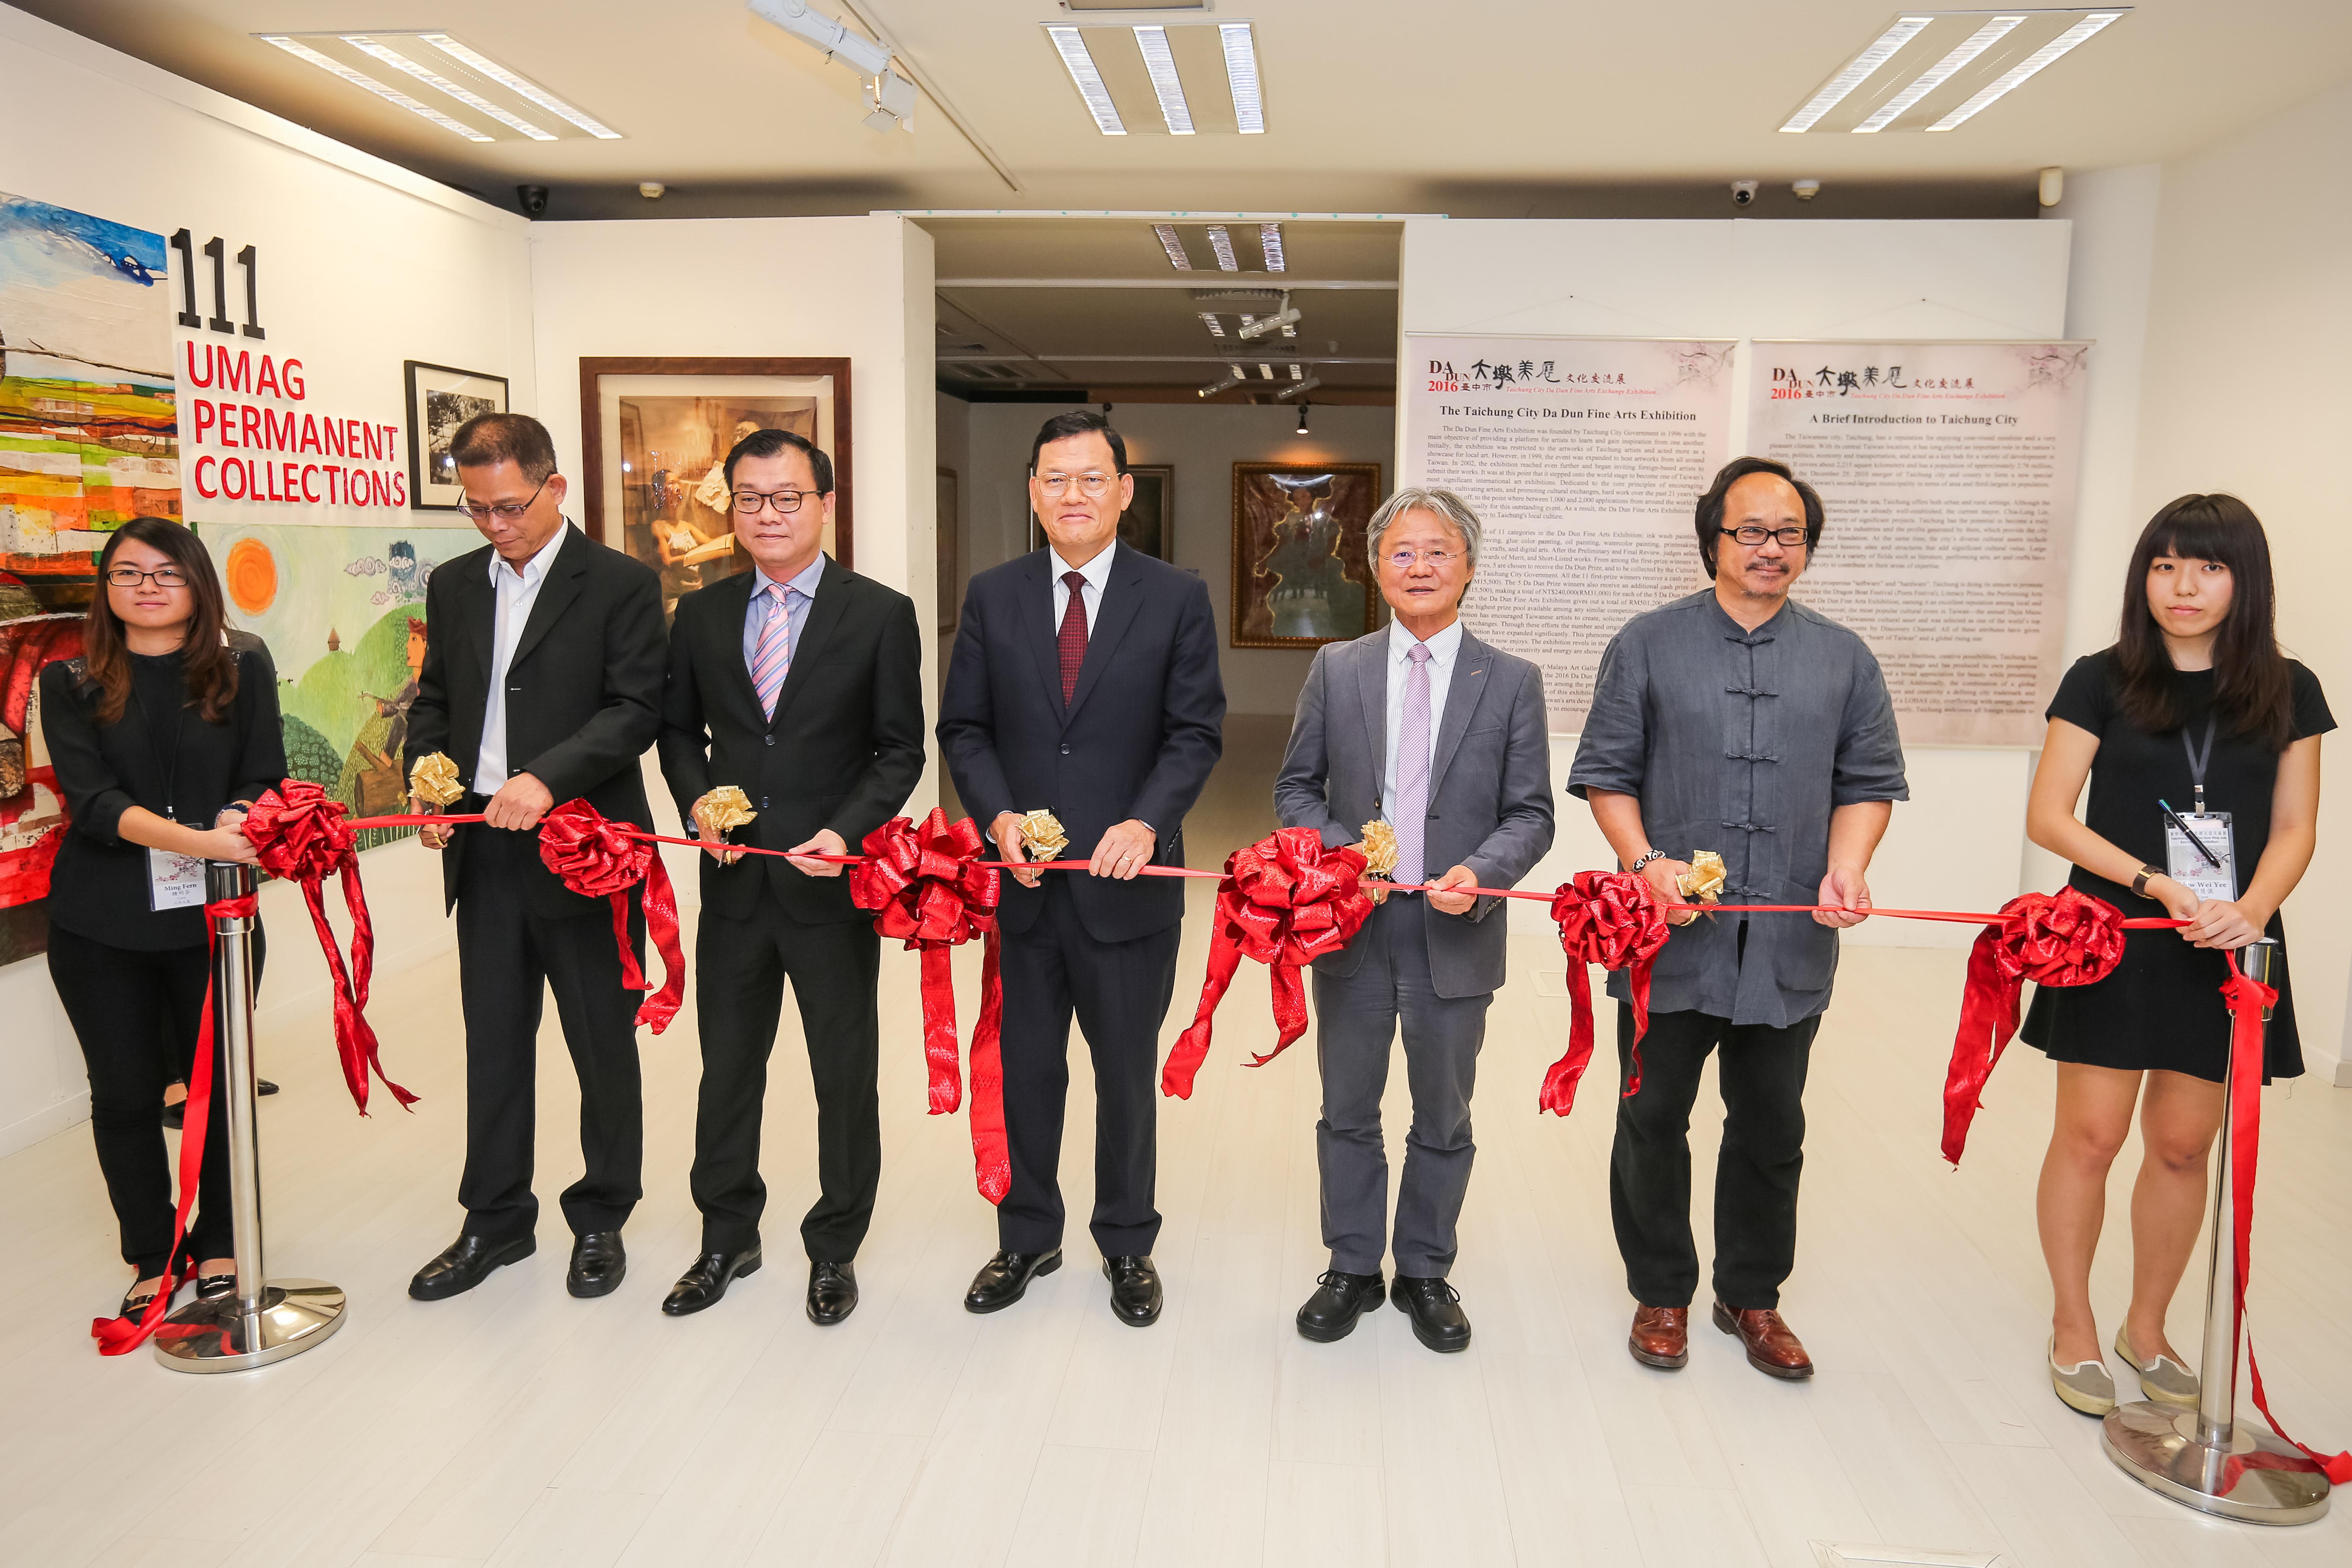 The “Taichung City Da Dun Fine Arts Exhibition” ribbon cutting ceremony was officiated by the Representative and Head of Mission from Taipei Economic and Cultural Office in Malaysia, Chang Chi-ping and Director-General of the Taichung City Government’s Cultural Affairs Bureau, Wang Chih-cheng (third from right), accompanied by the President of Malaysia-Taiwan Trade Federation Association, Dato Seri Tang Ying Lik (second from right), President of Federation of Alumni Associations of Taiwan Universities, Malaysia, Peng Choong Leng (third from left), National Vice-President of Taipei Investors' Association in Malaysia, Chang Yuang Chuan (second from left).